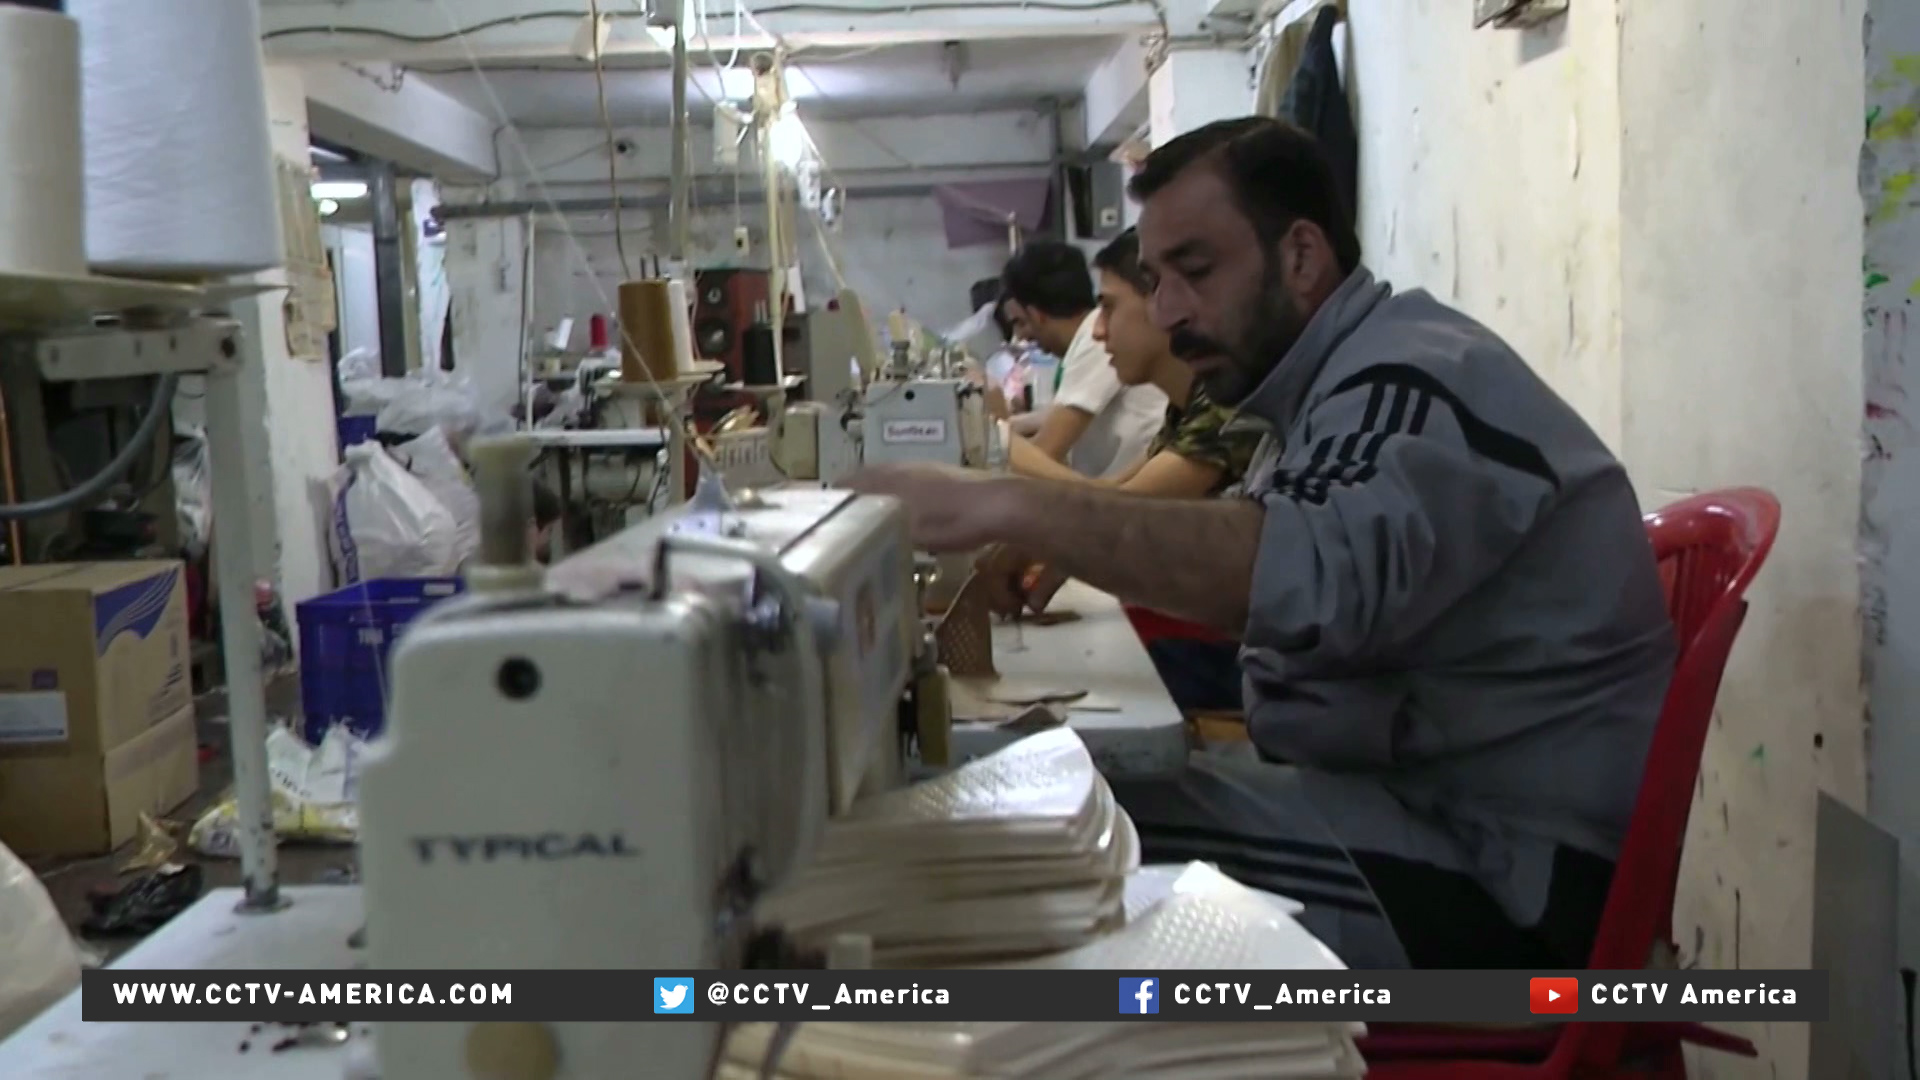 Syrian refugees try to carve future in Gaziantep,Turkey